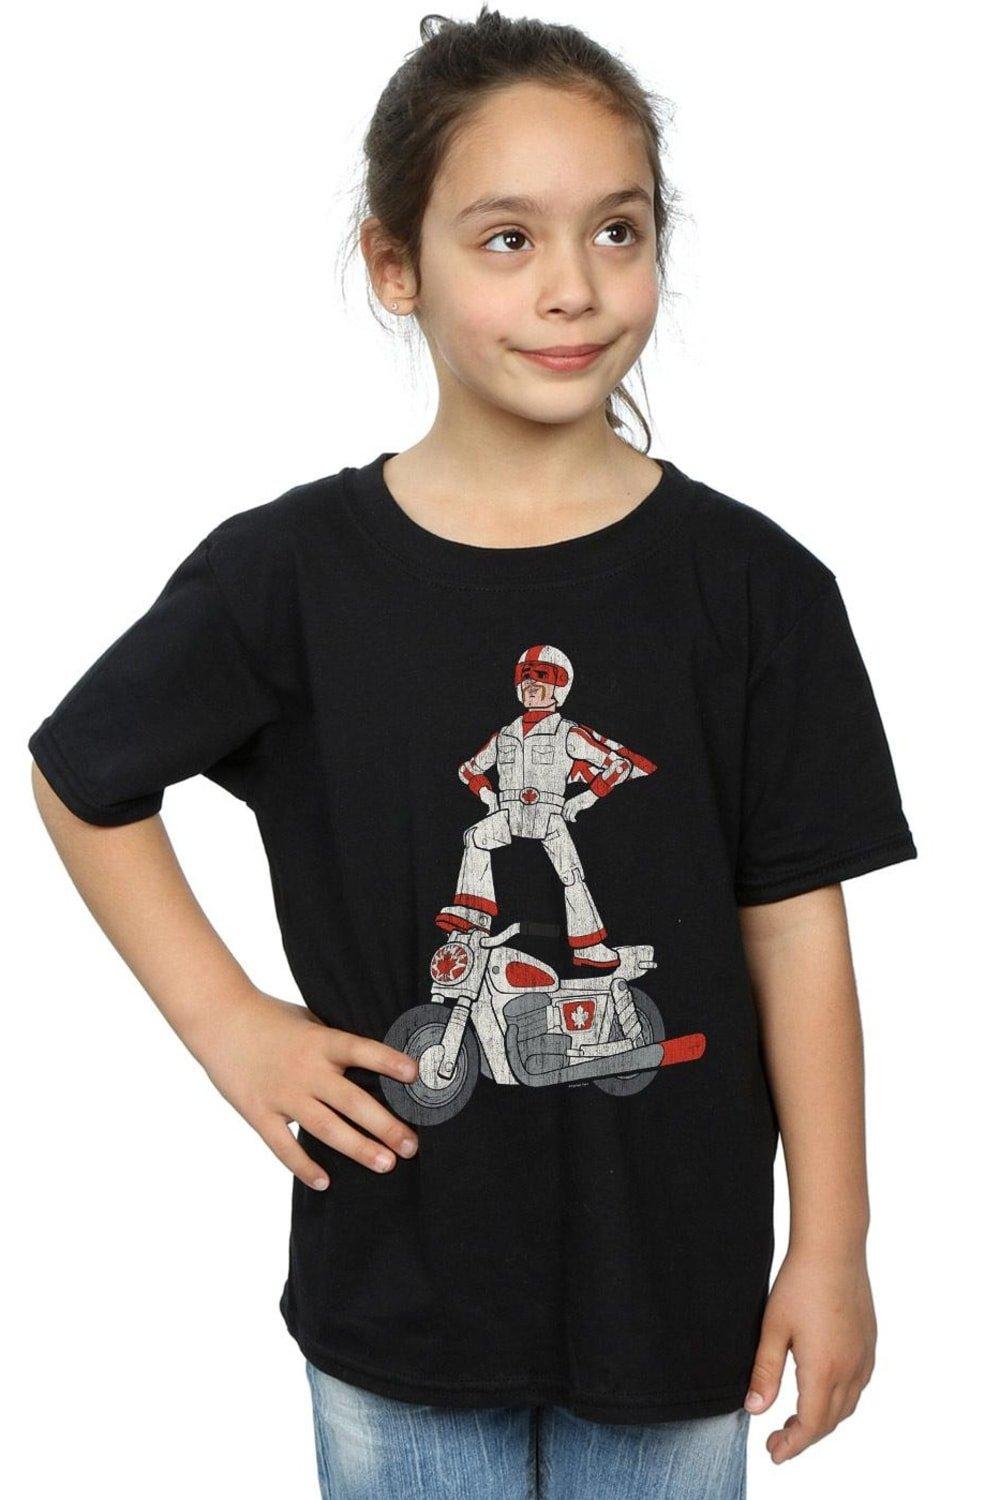 Toy Story 4 Duke Caboom Pose Cotton T-Shirt